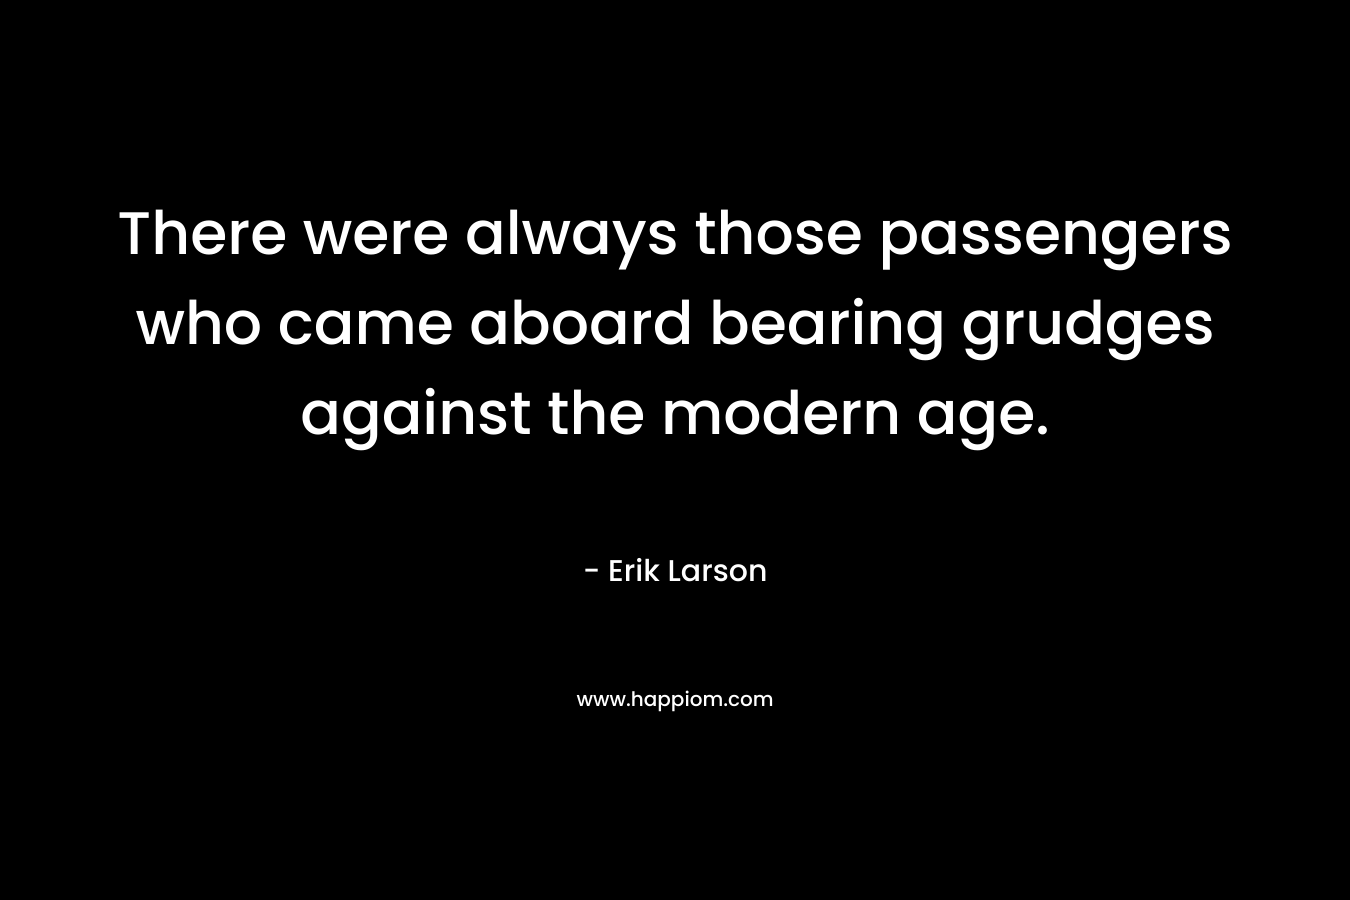 There were always those passengers who came aboard bearing grudges against the modern age. – Erik Larson